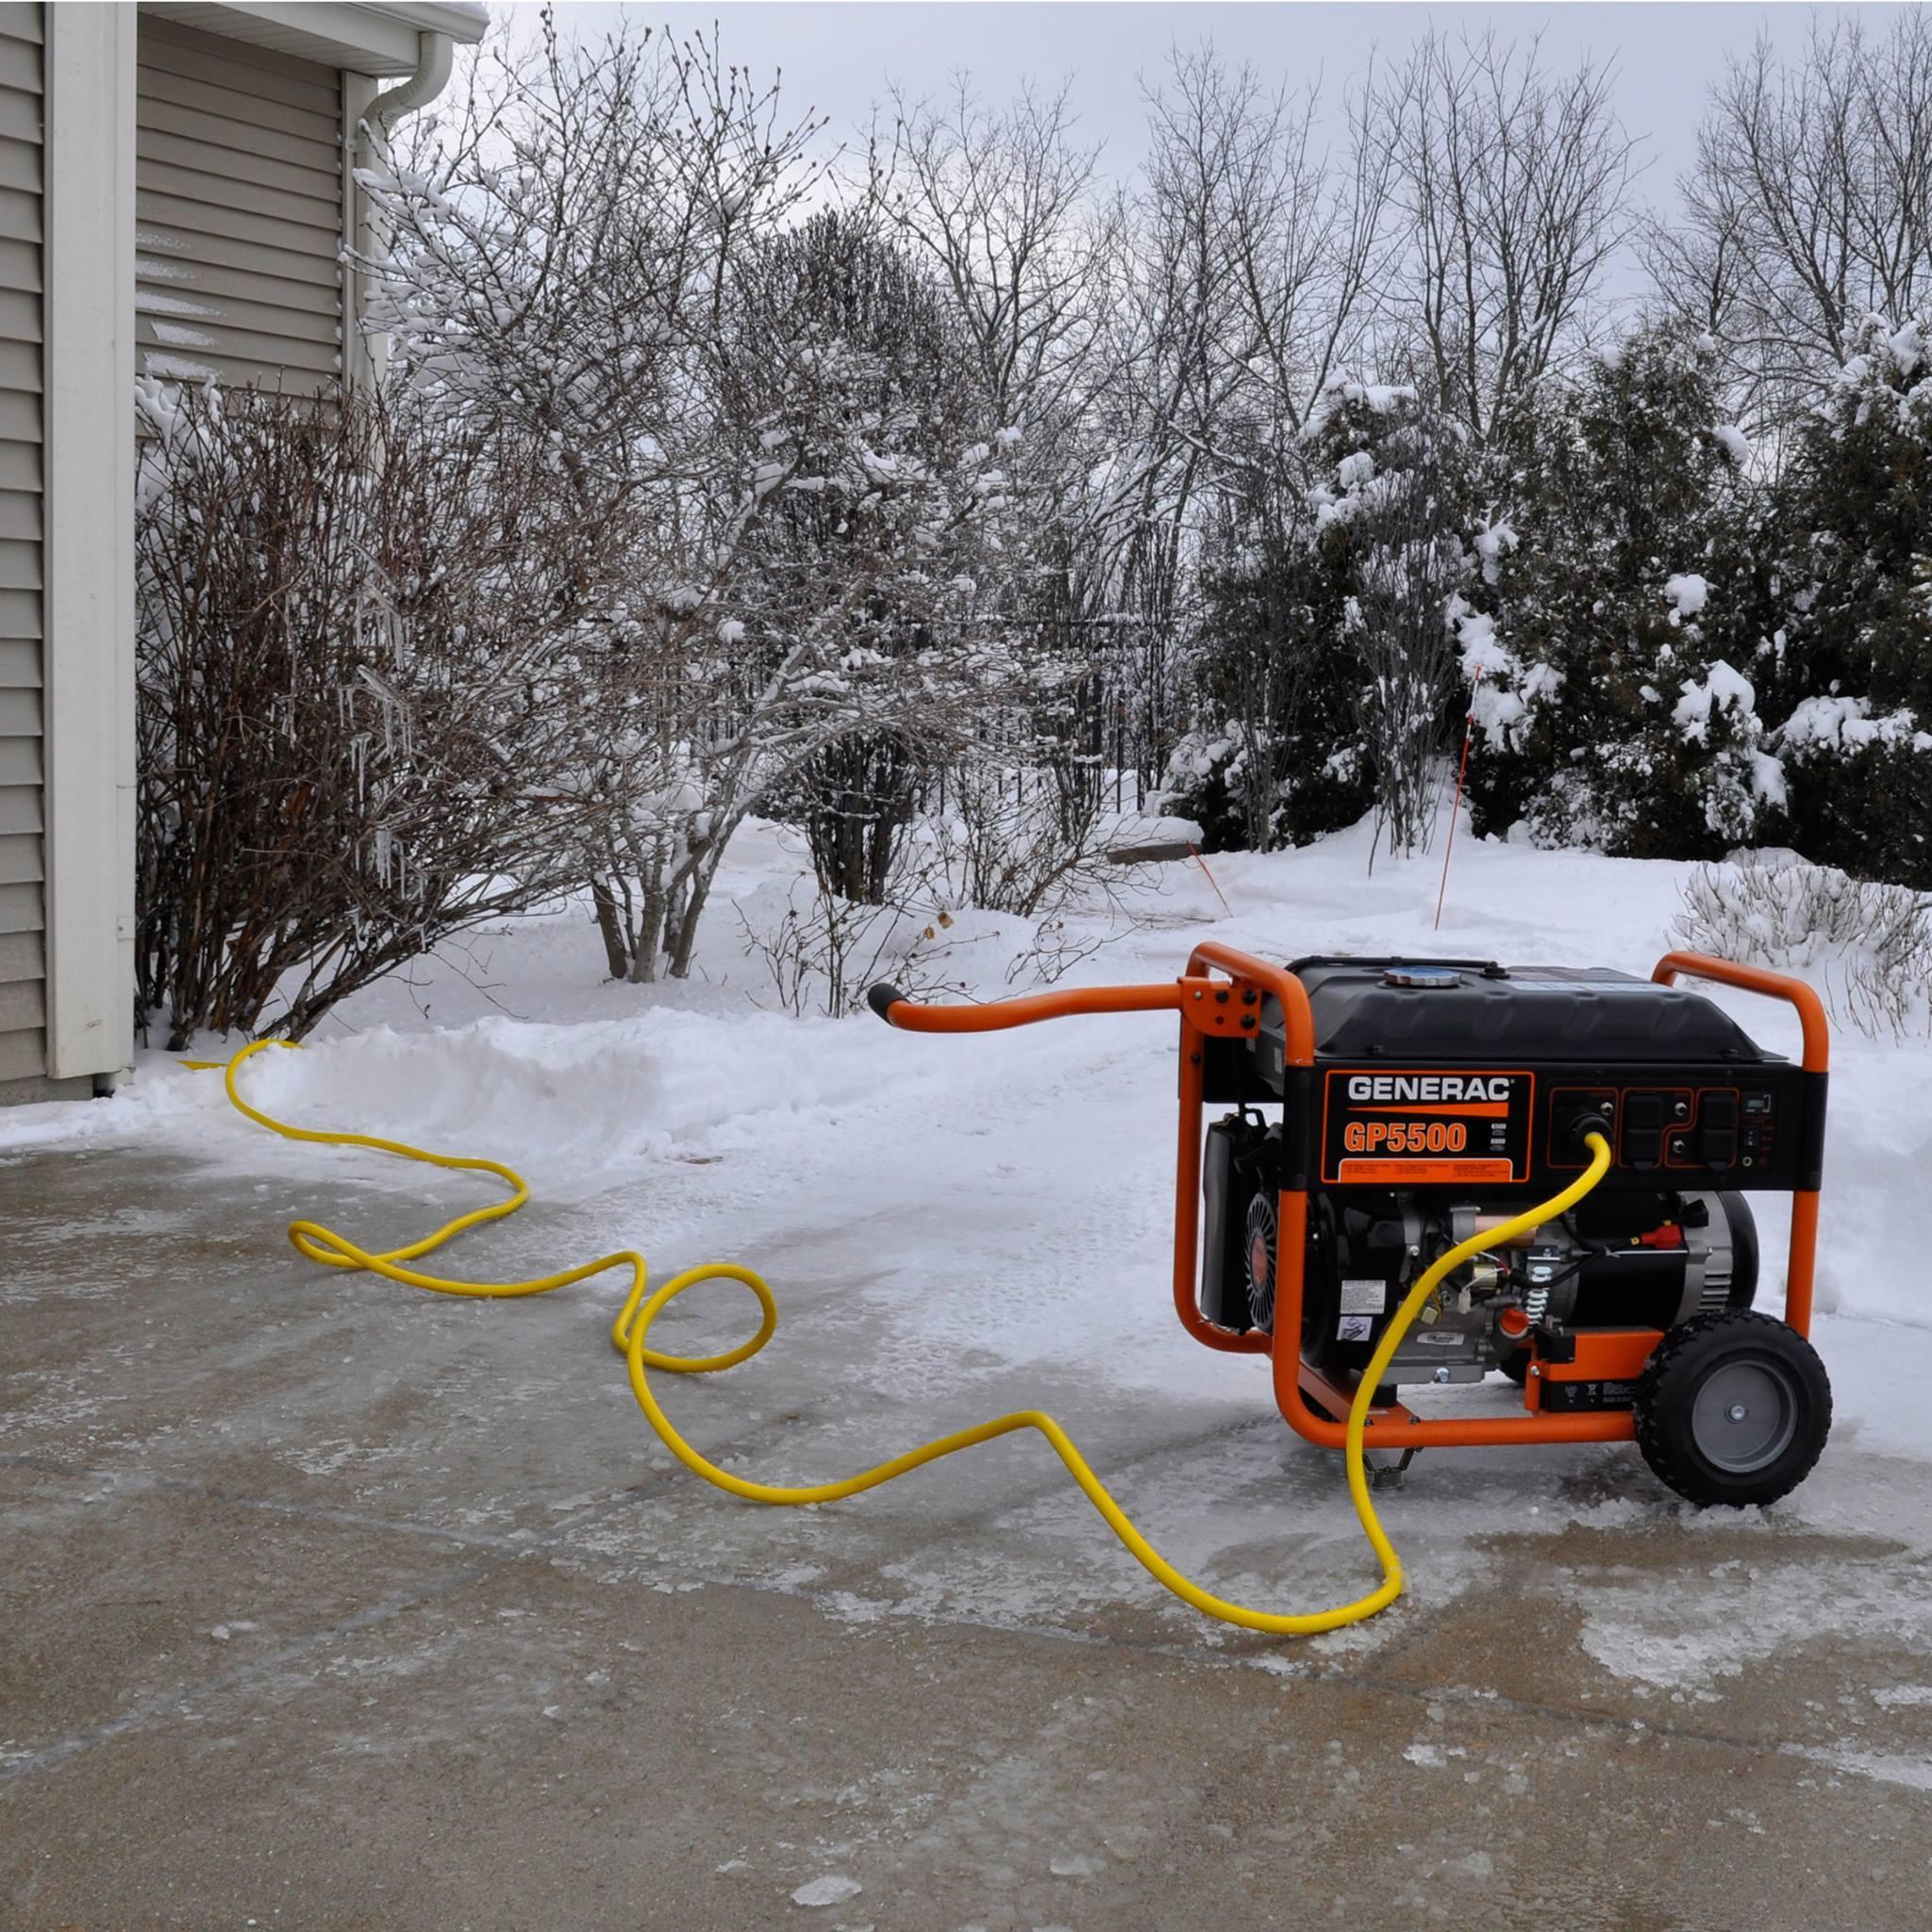 Five Tips to Prepare Your Portable Generator for Winter Weather